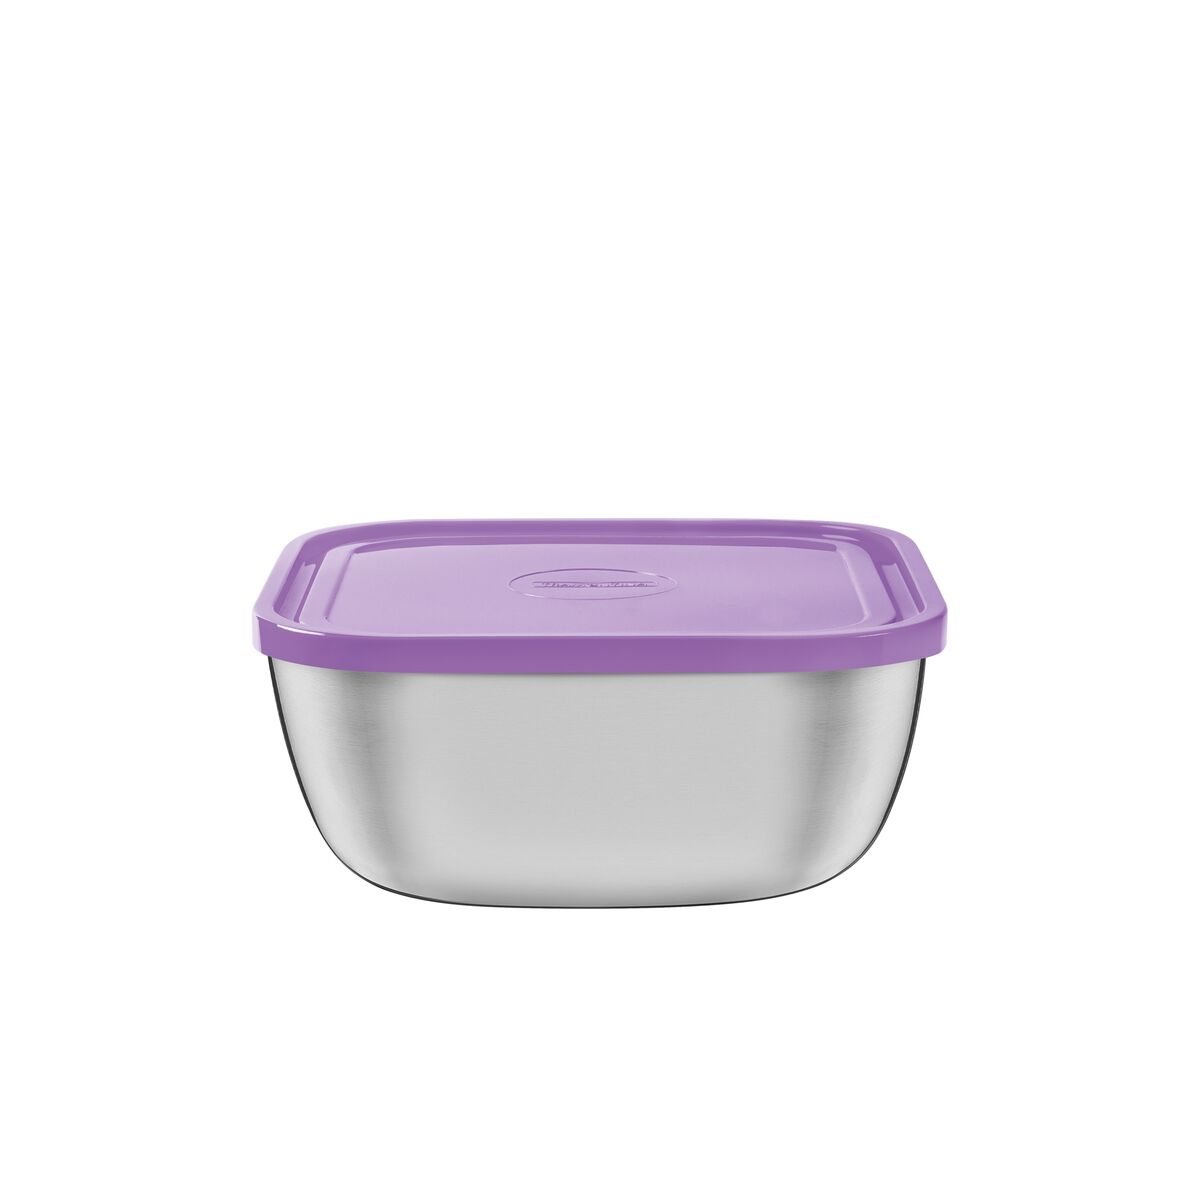 Tramontina Freezinox square stainless steel container with lilac plastic lid, 16 cm and 1.2 L